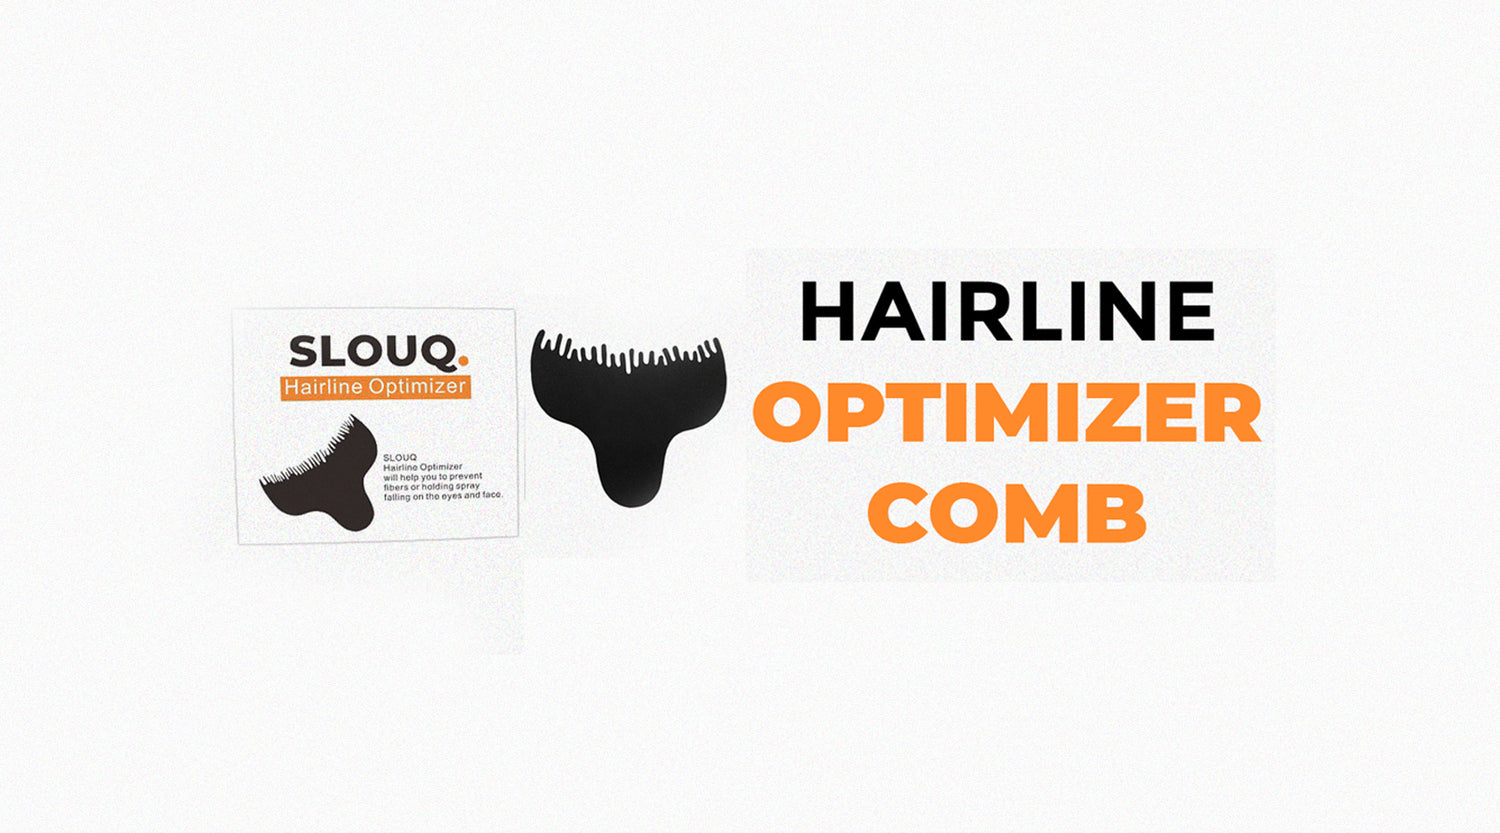 SLOUQ Hairline Optimizer: The Perfect Solution to Messy Hairline